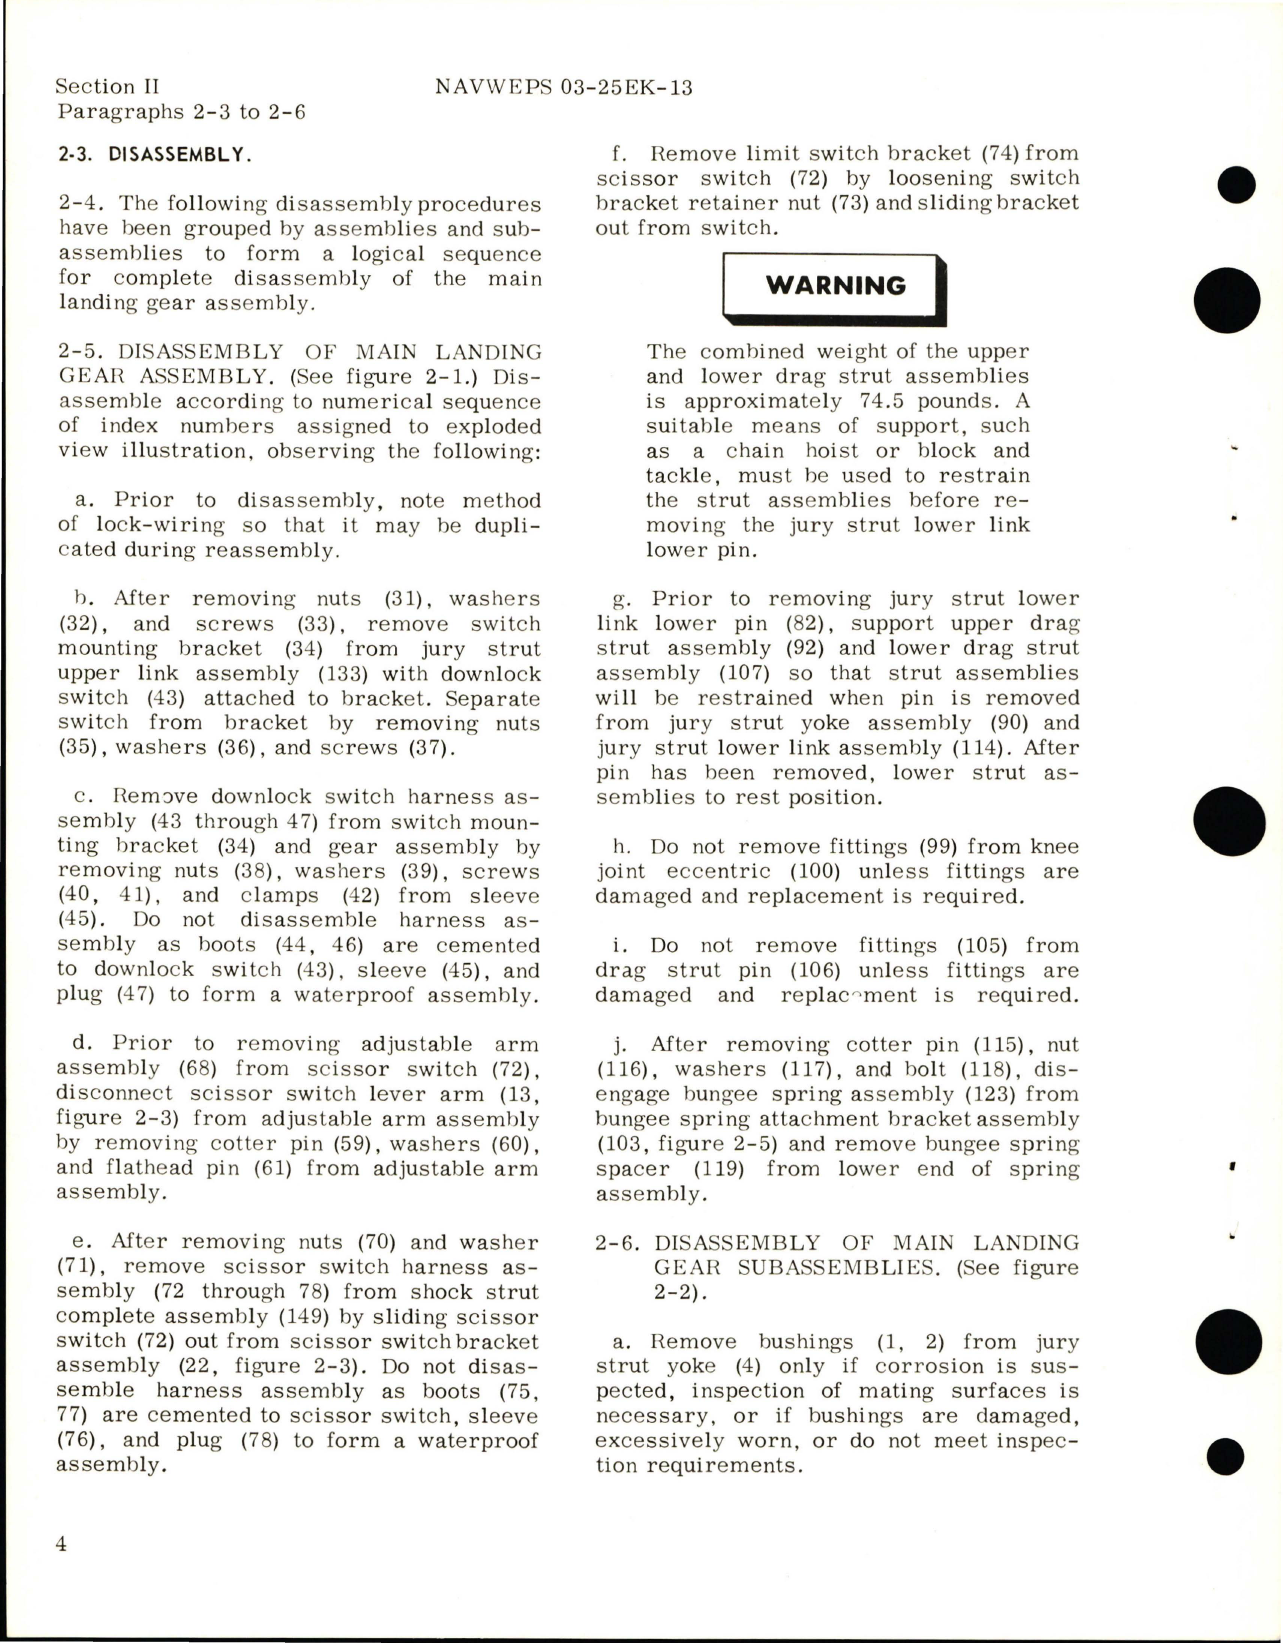 Sample page 8 from AirCorps Library document: Overhaul Instructions for Main Landing Gear Assembly - Part 901027-5